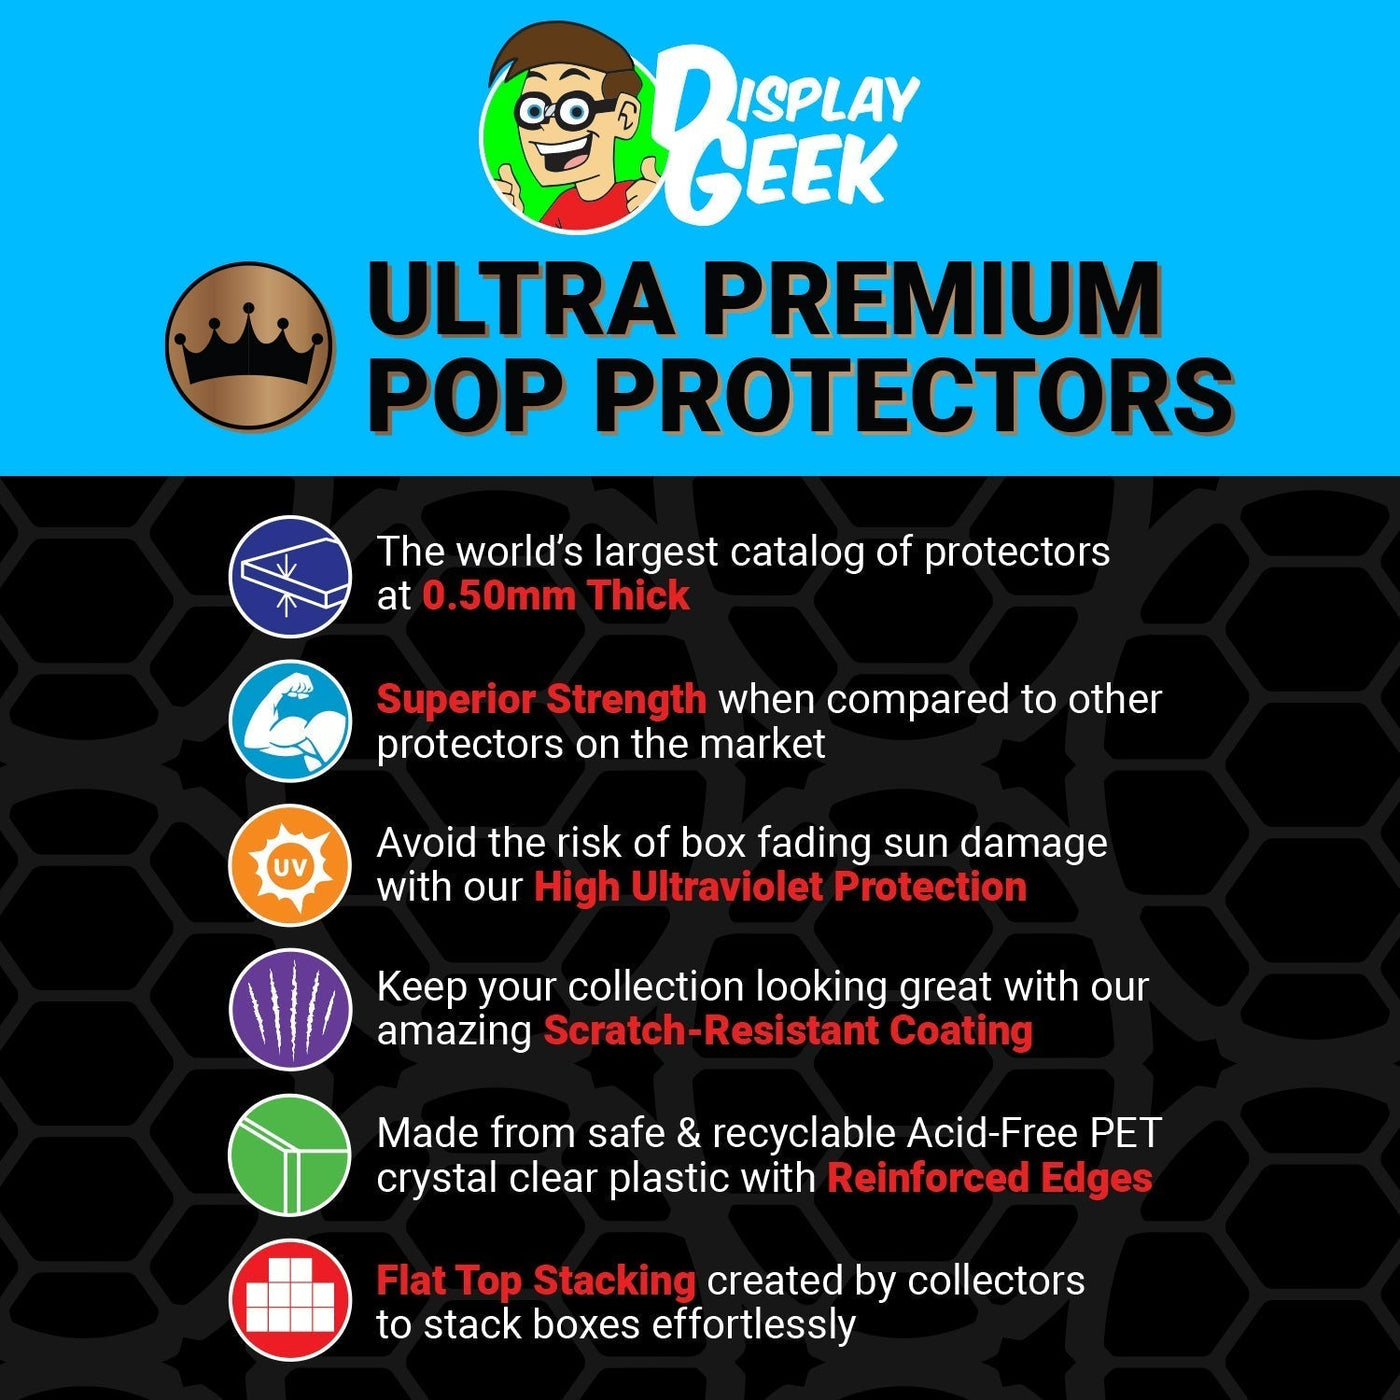 Pop Protector for 2 Pack Chip & Dale Flocked SDCC Funko Pop on The Protector Guide App by Display Geek